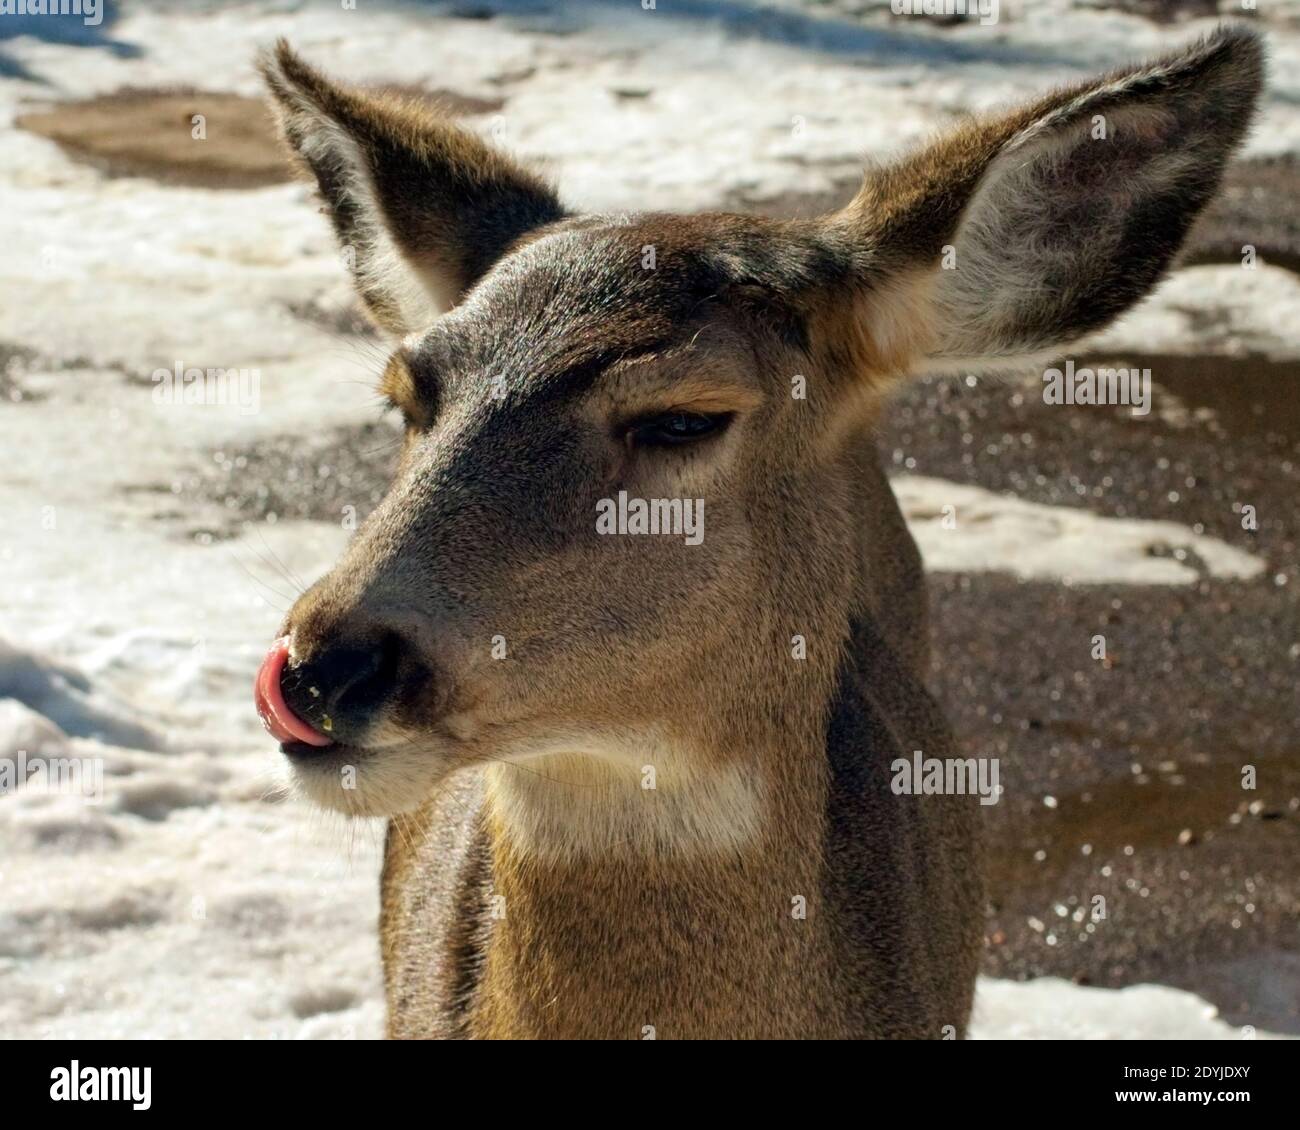 Yearling, Whitetail deer, in Red River, NM, USA licking popcorn off it's nose, melting snow on the ground. Head shot Stock Photo